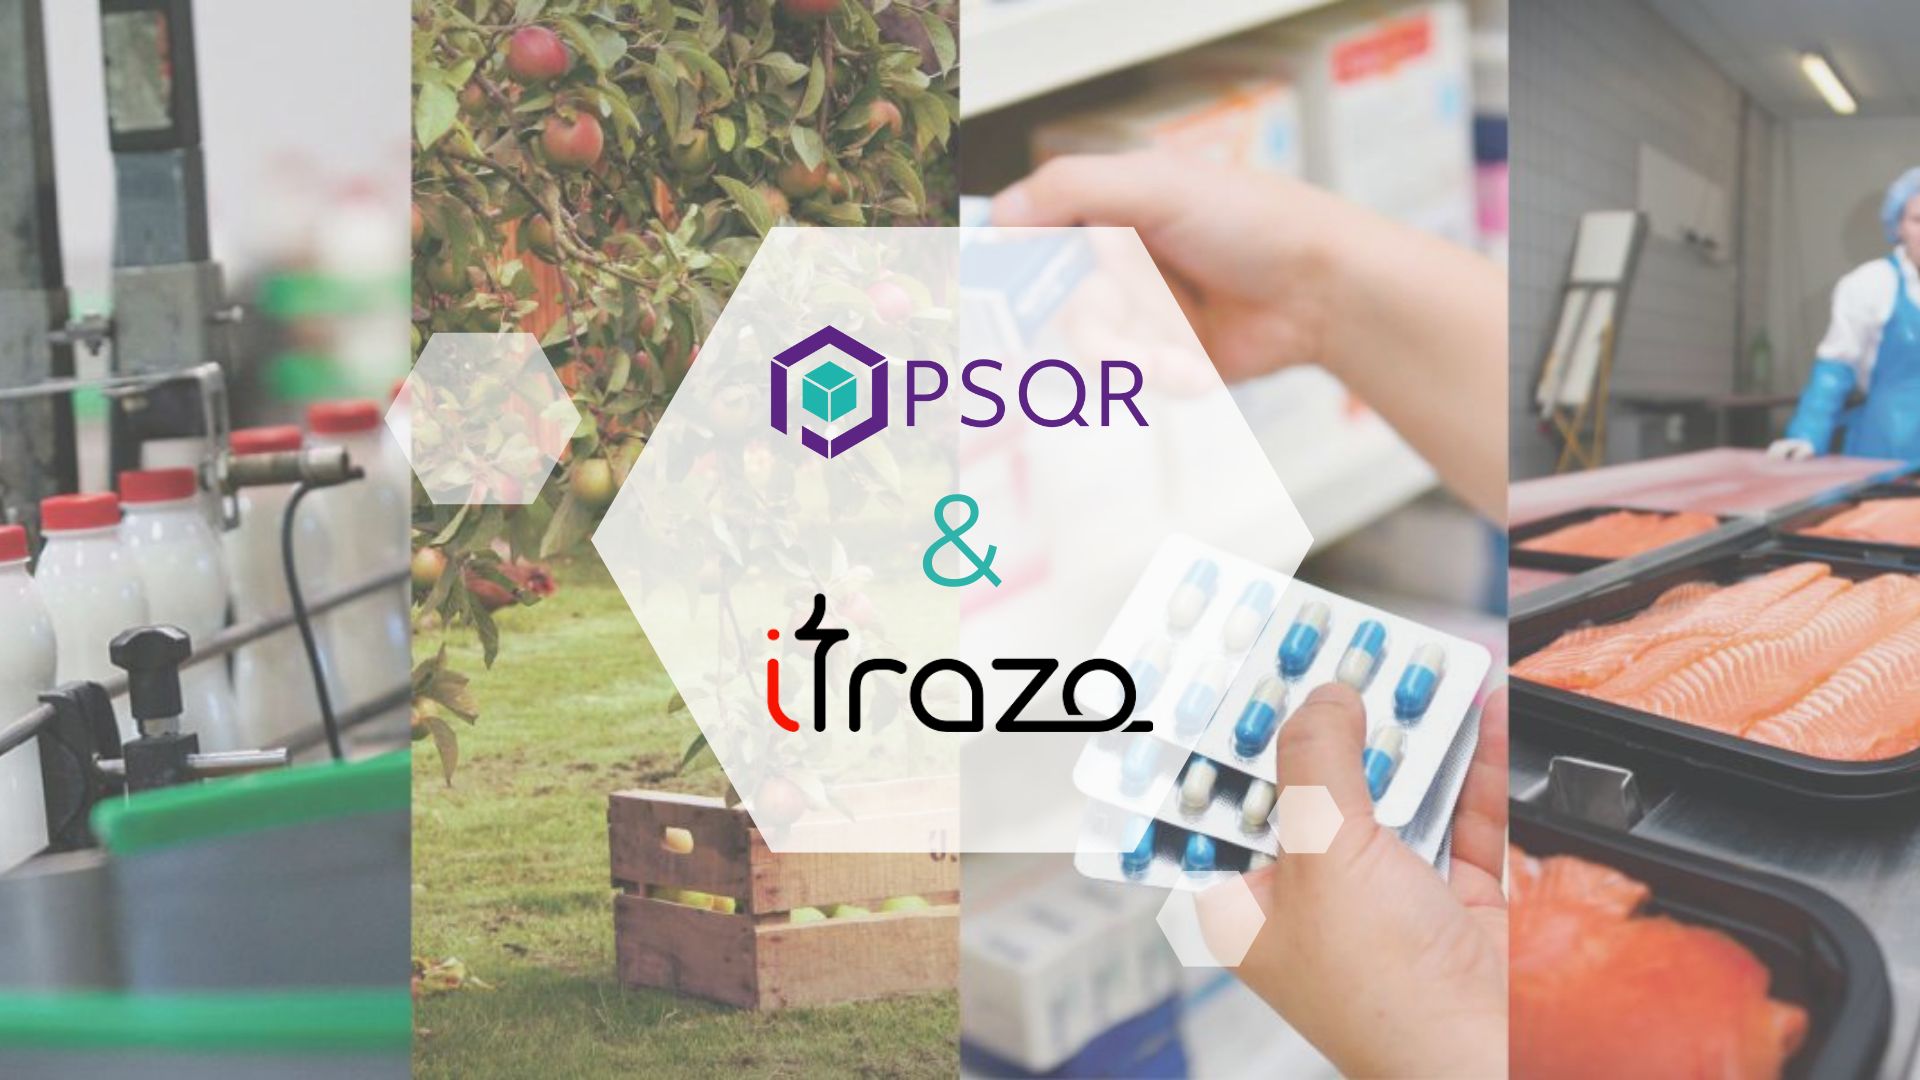 Track and Trace Technology Companies Join Forces - iTrazo & PSQR